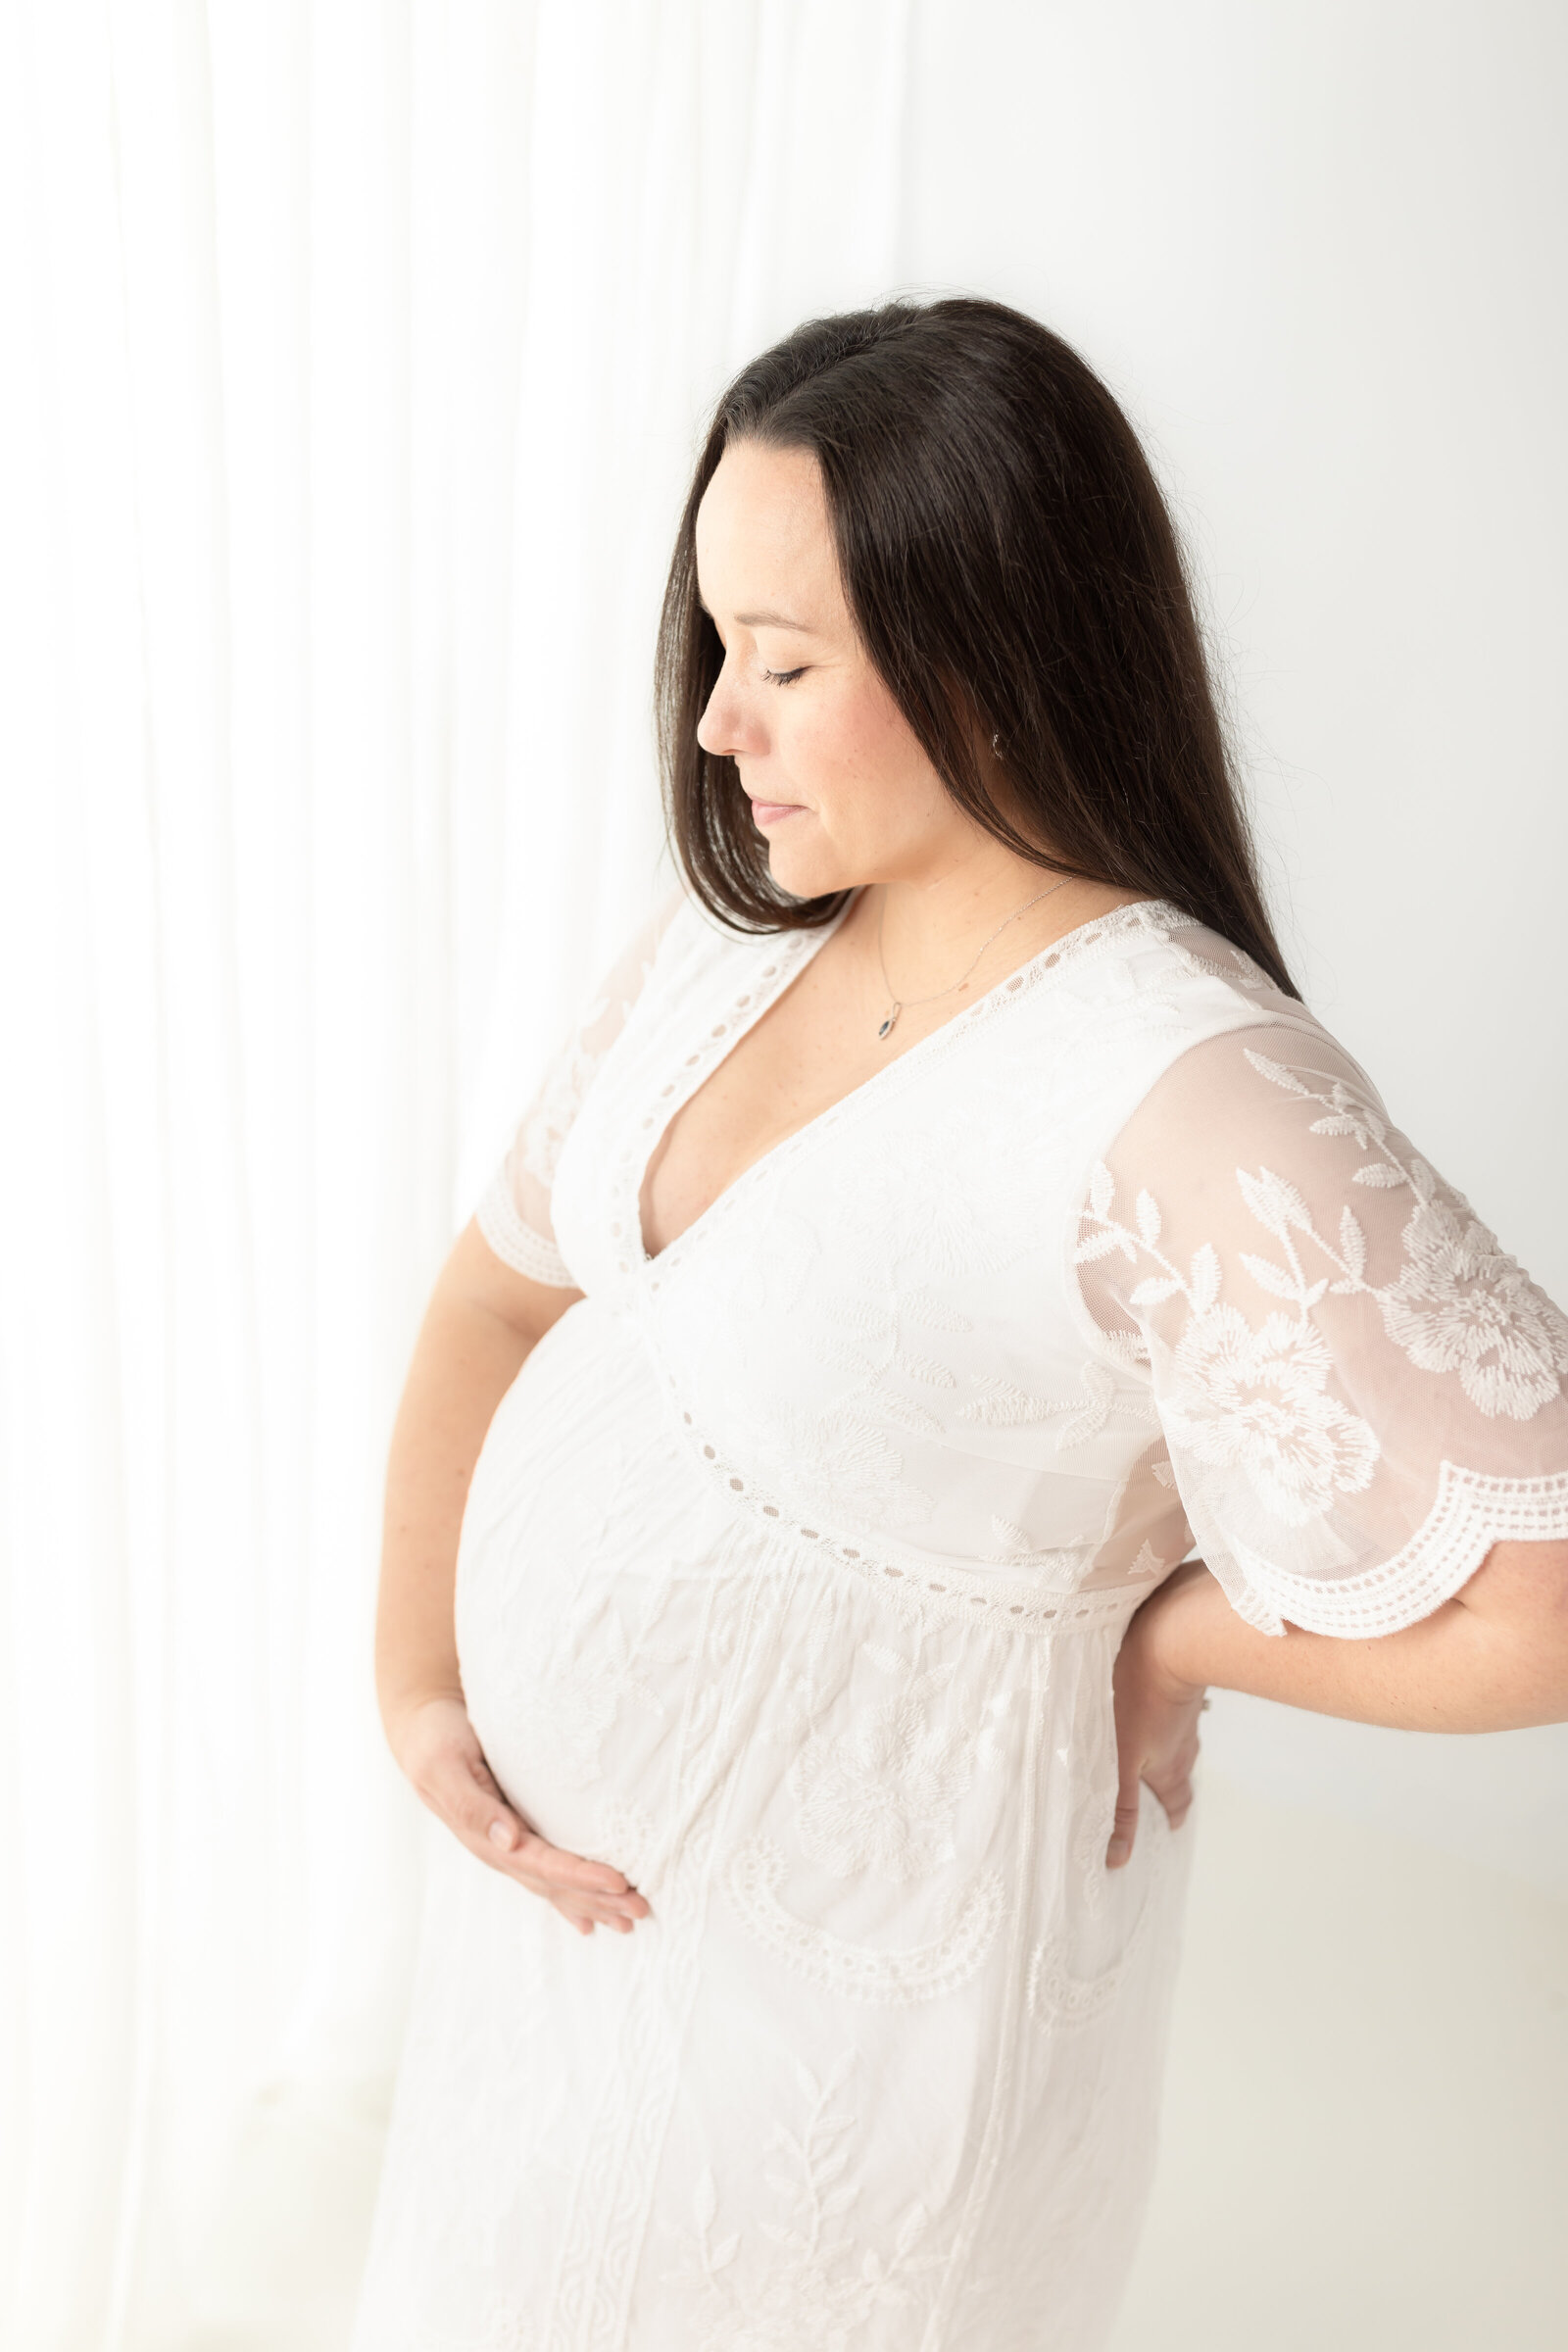 pregnant mother holding belly in white lace dress for maternity photoshoot Cleveland maternity photographer